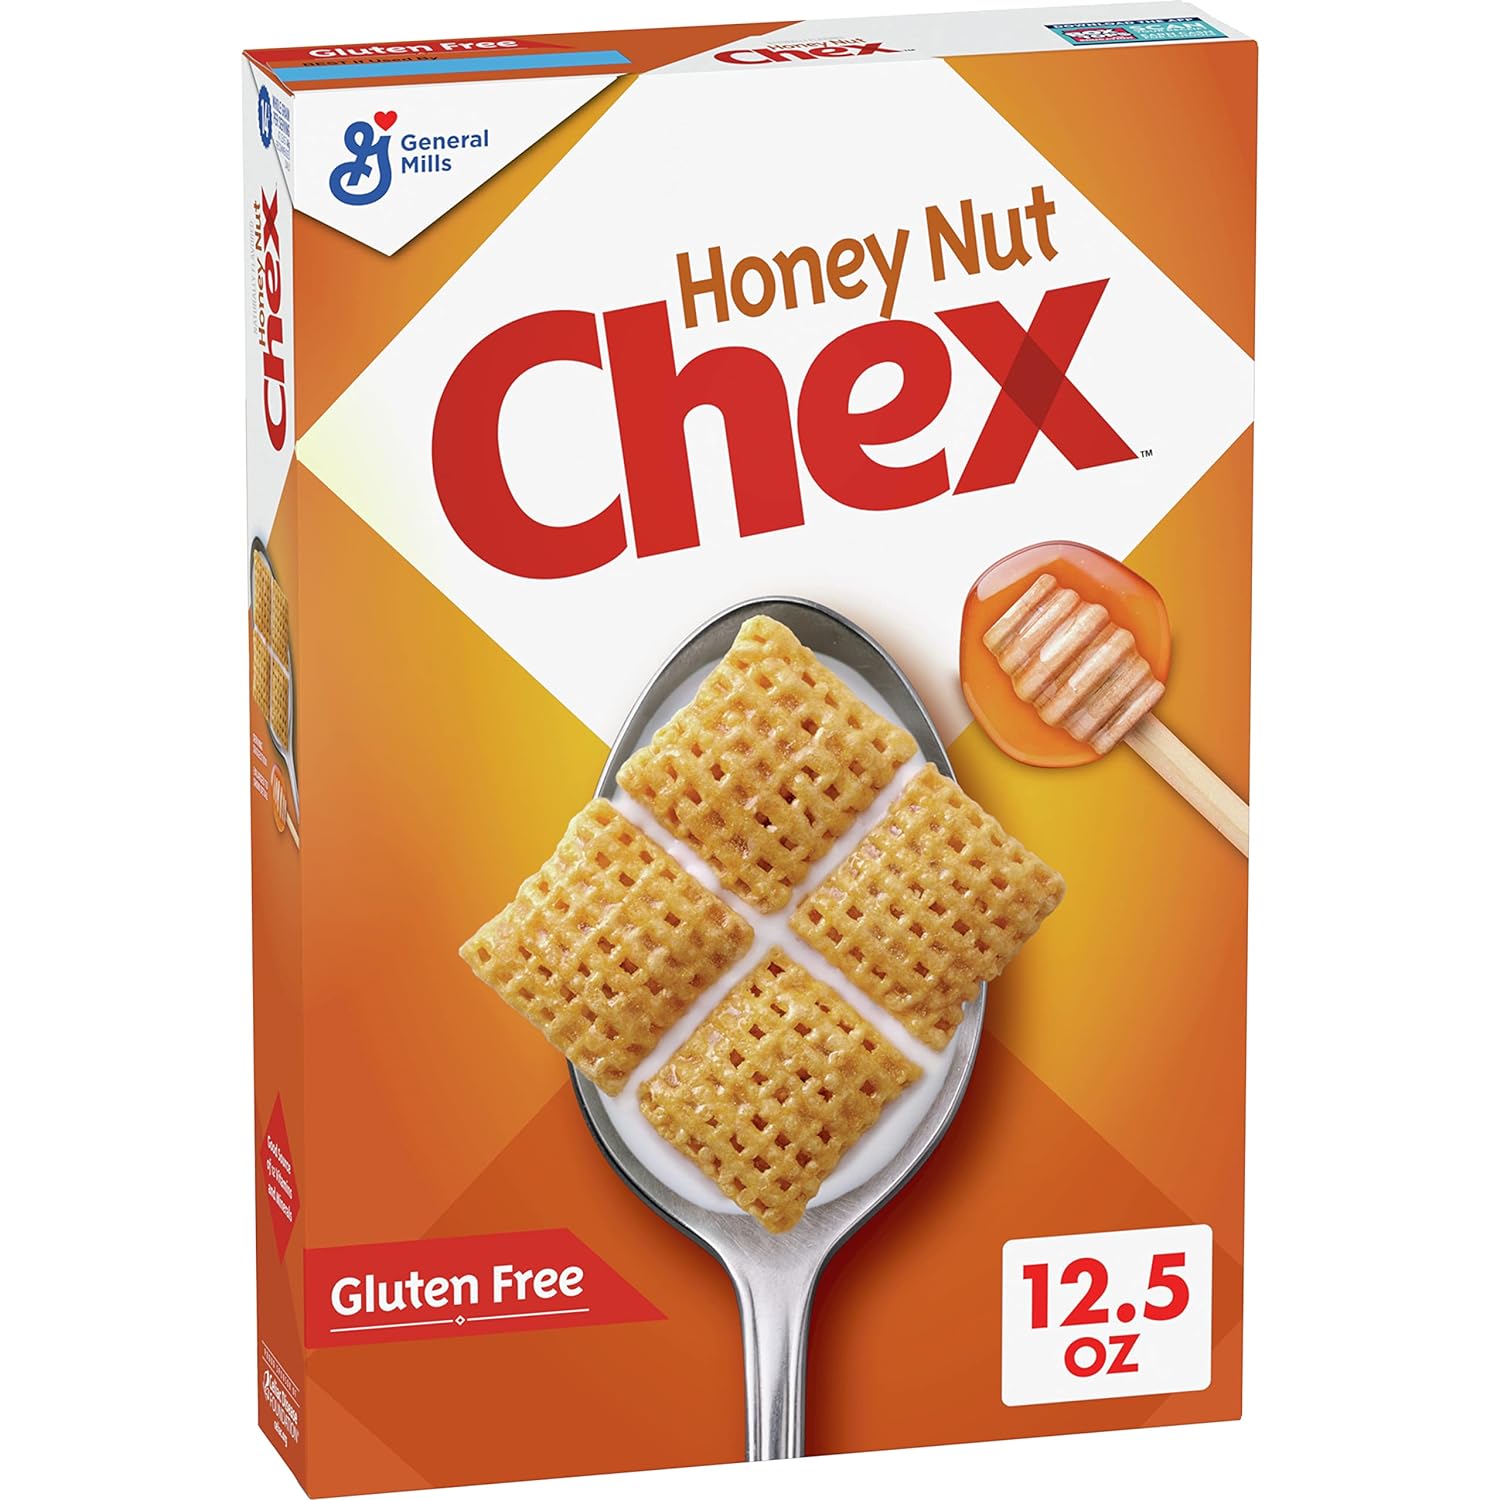 Honey Nut Chex Cereal, Gluten Free Breakfast Cereal, Made with Whole Grain, 12.5 OZ